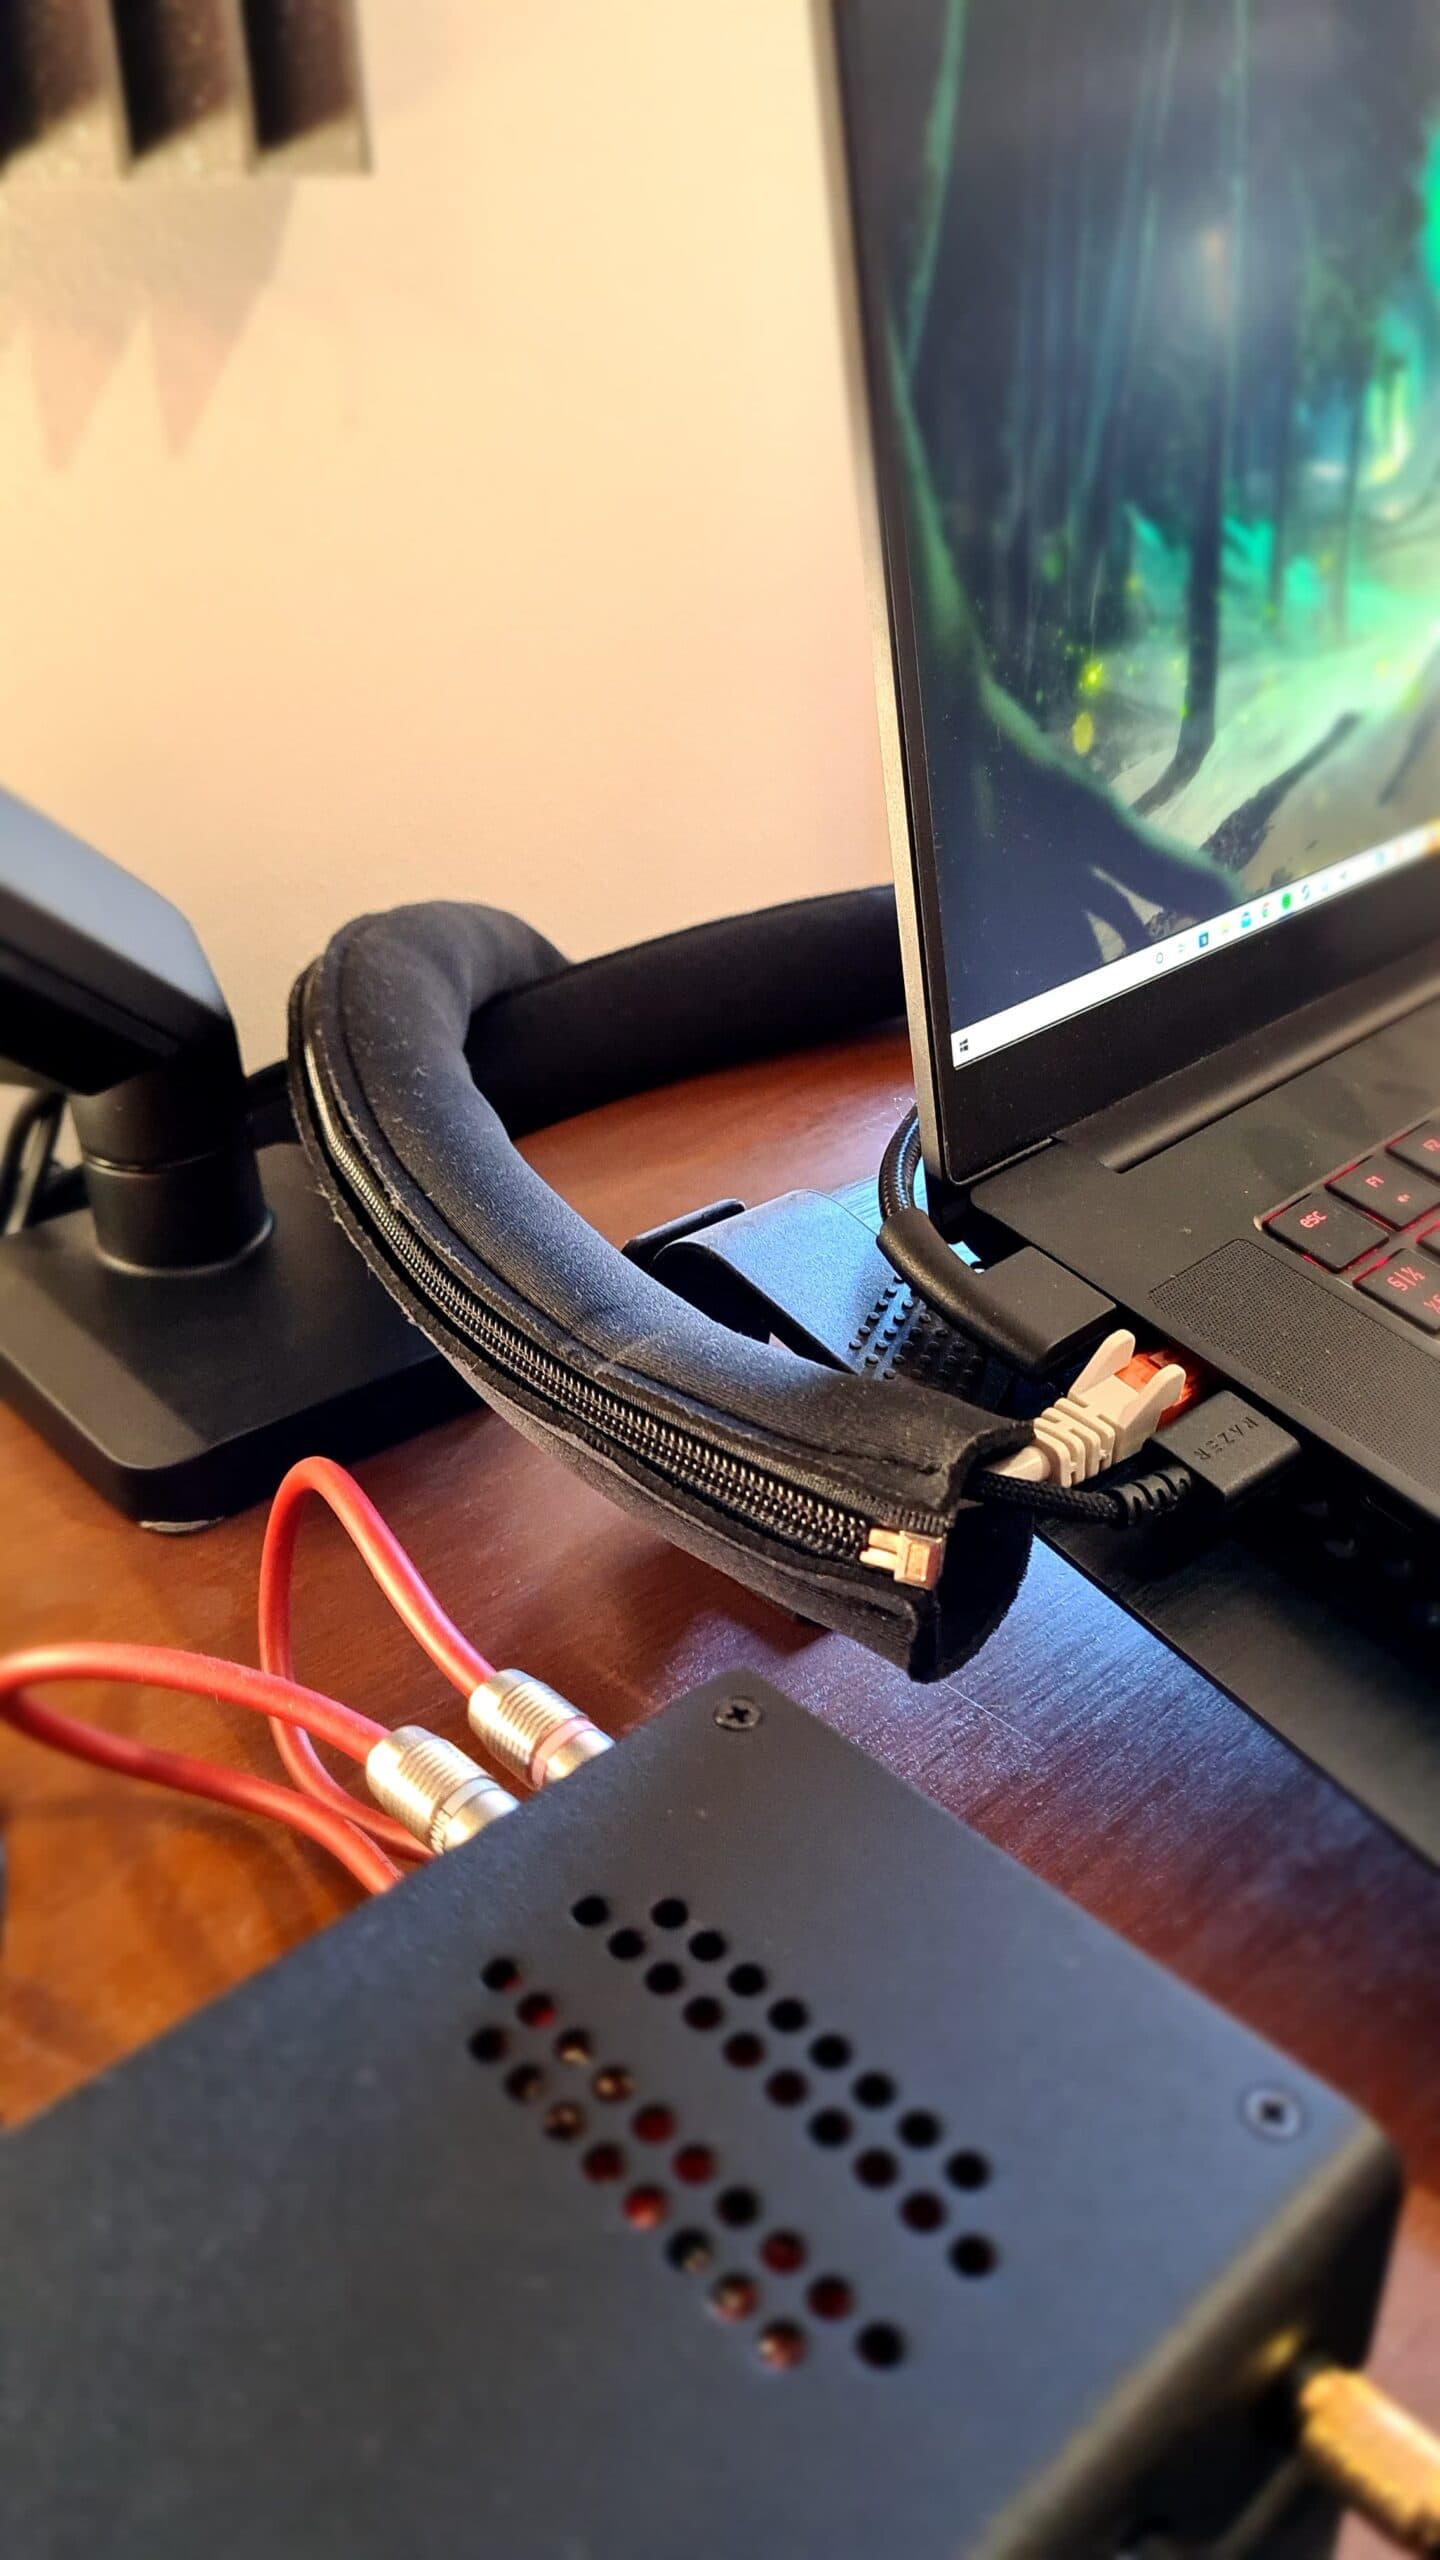 Neoprene cable sleeve is easy way to manage PC cables on desk